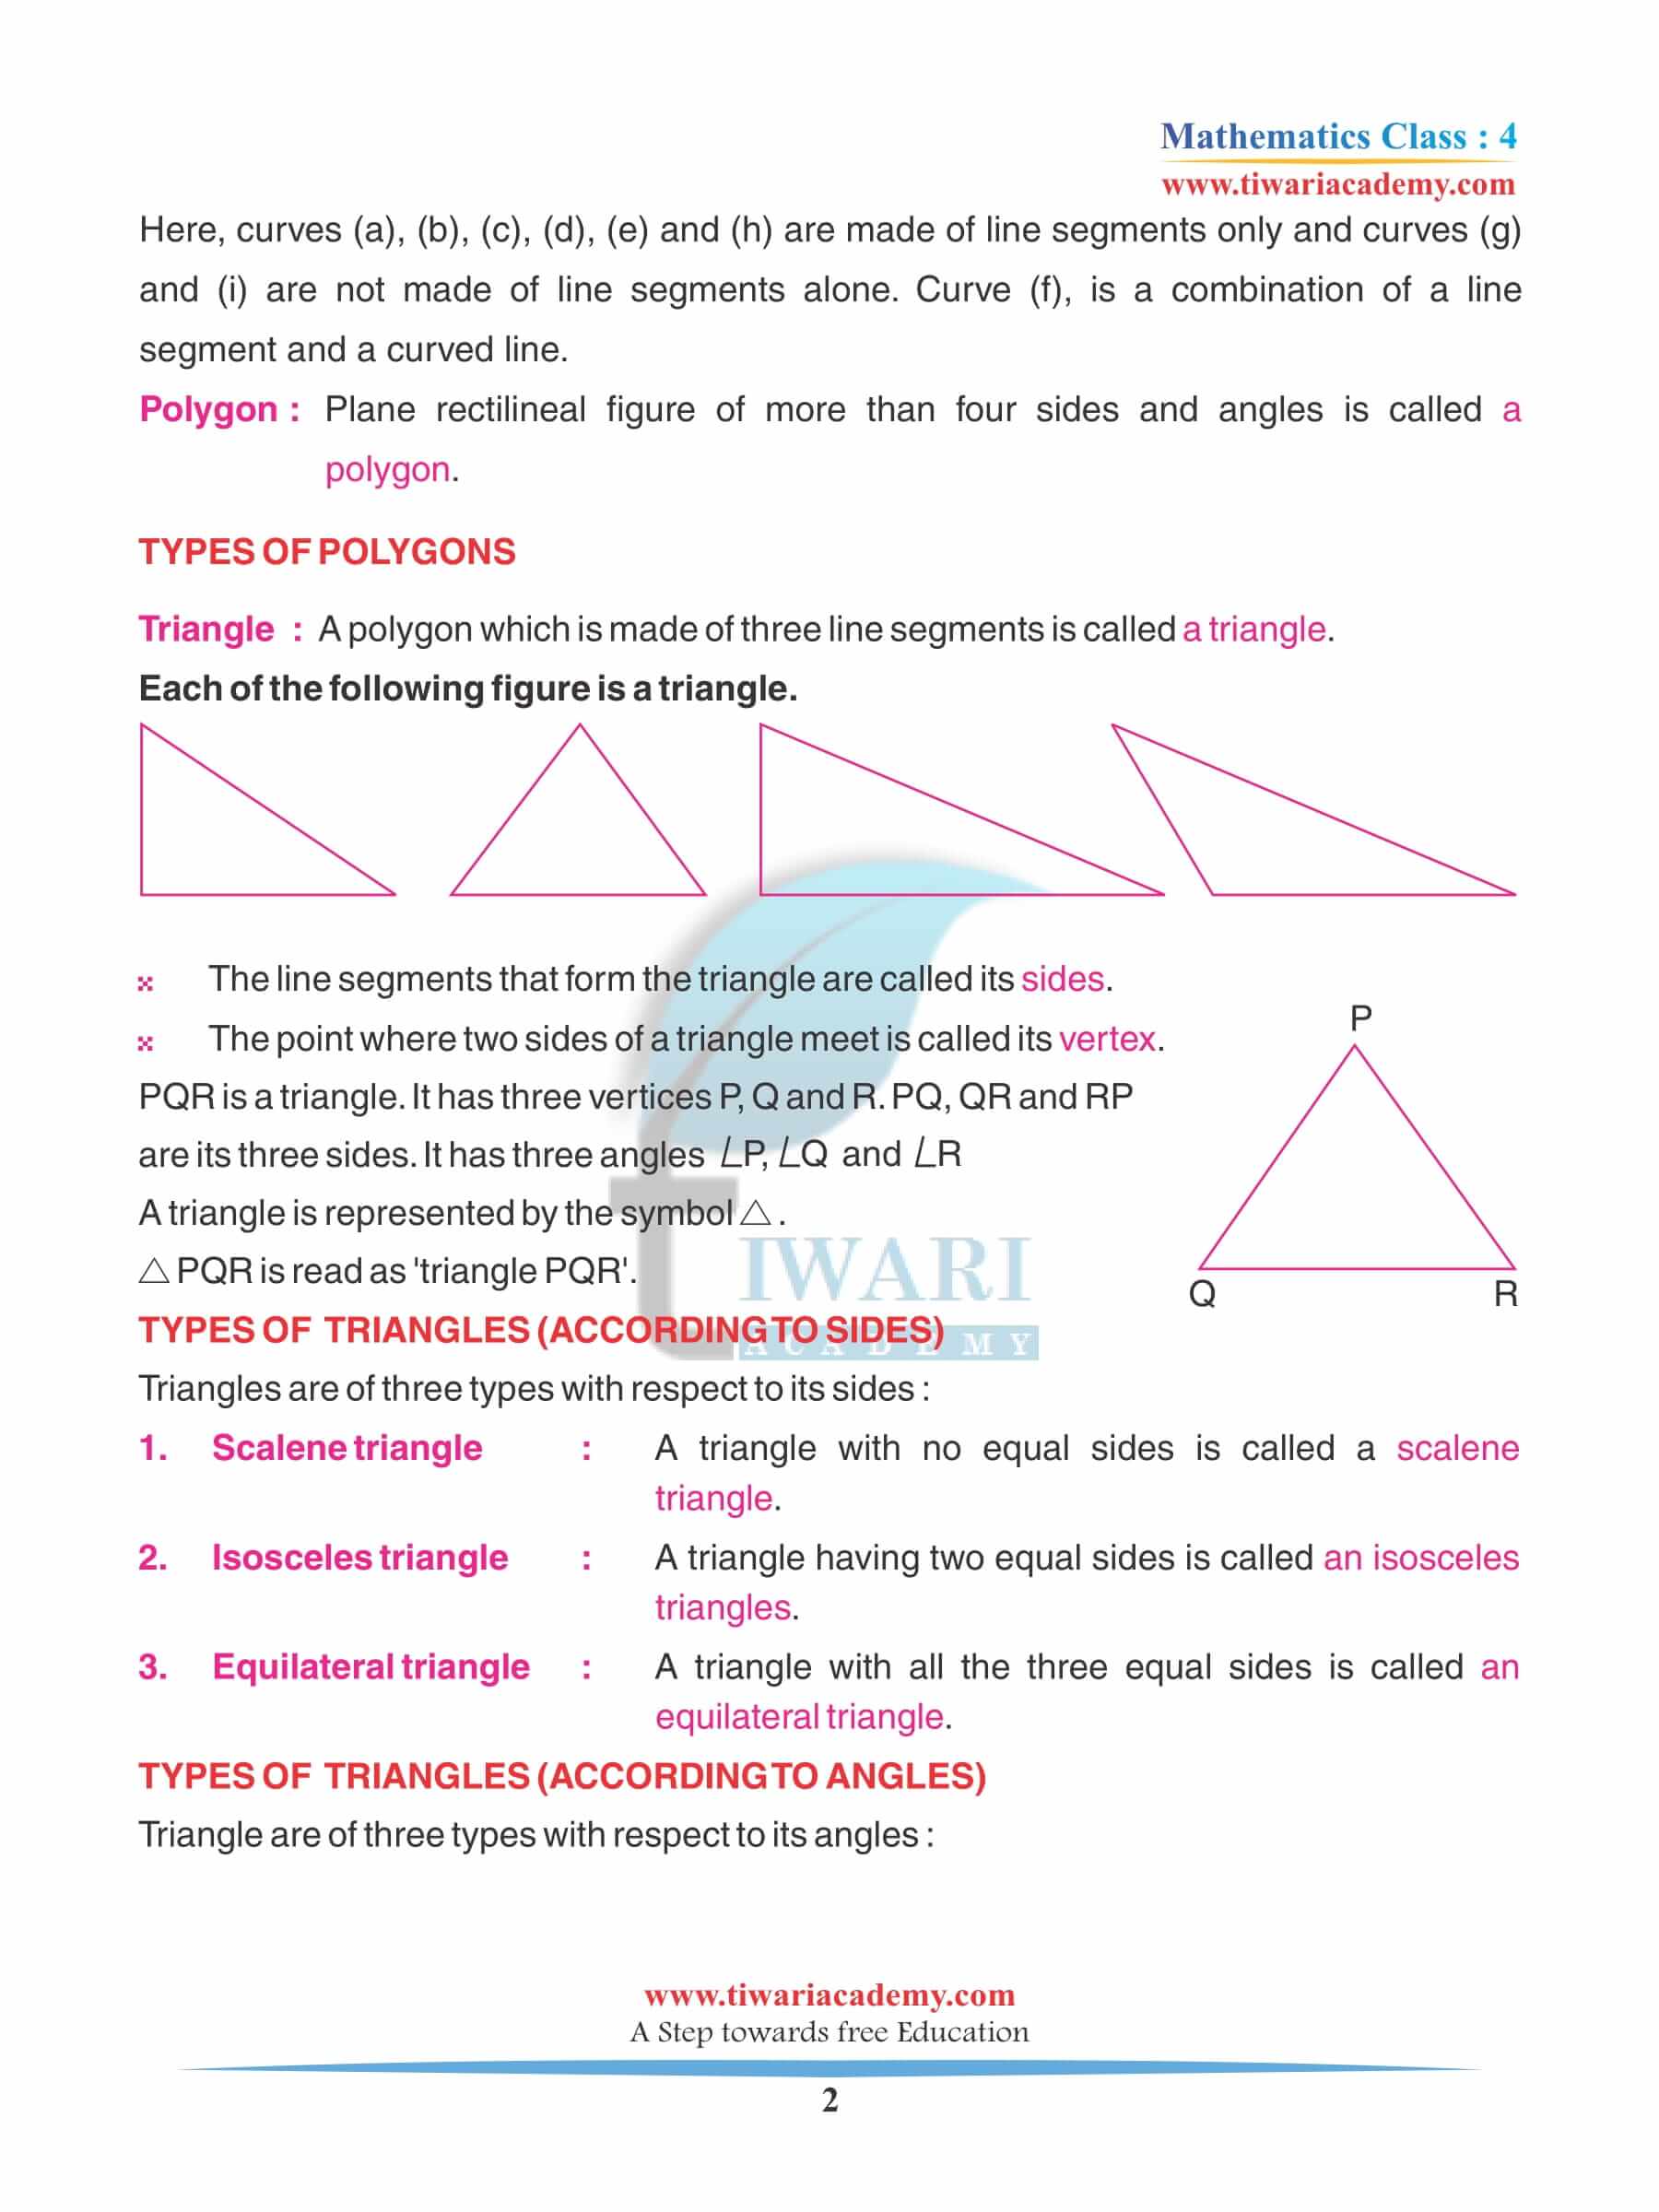 Class 4 Maths Chapter 8 Revision Questions